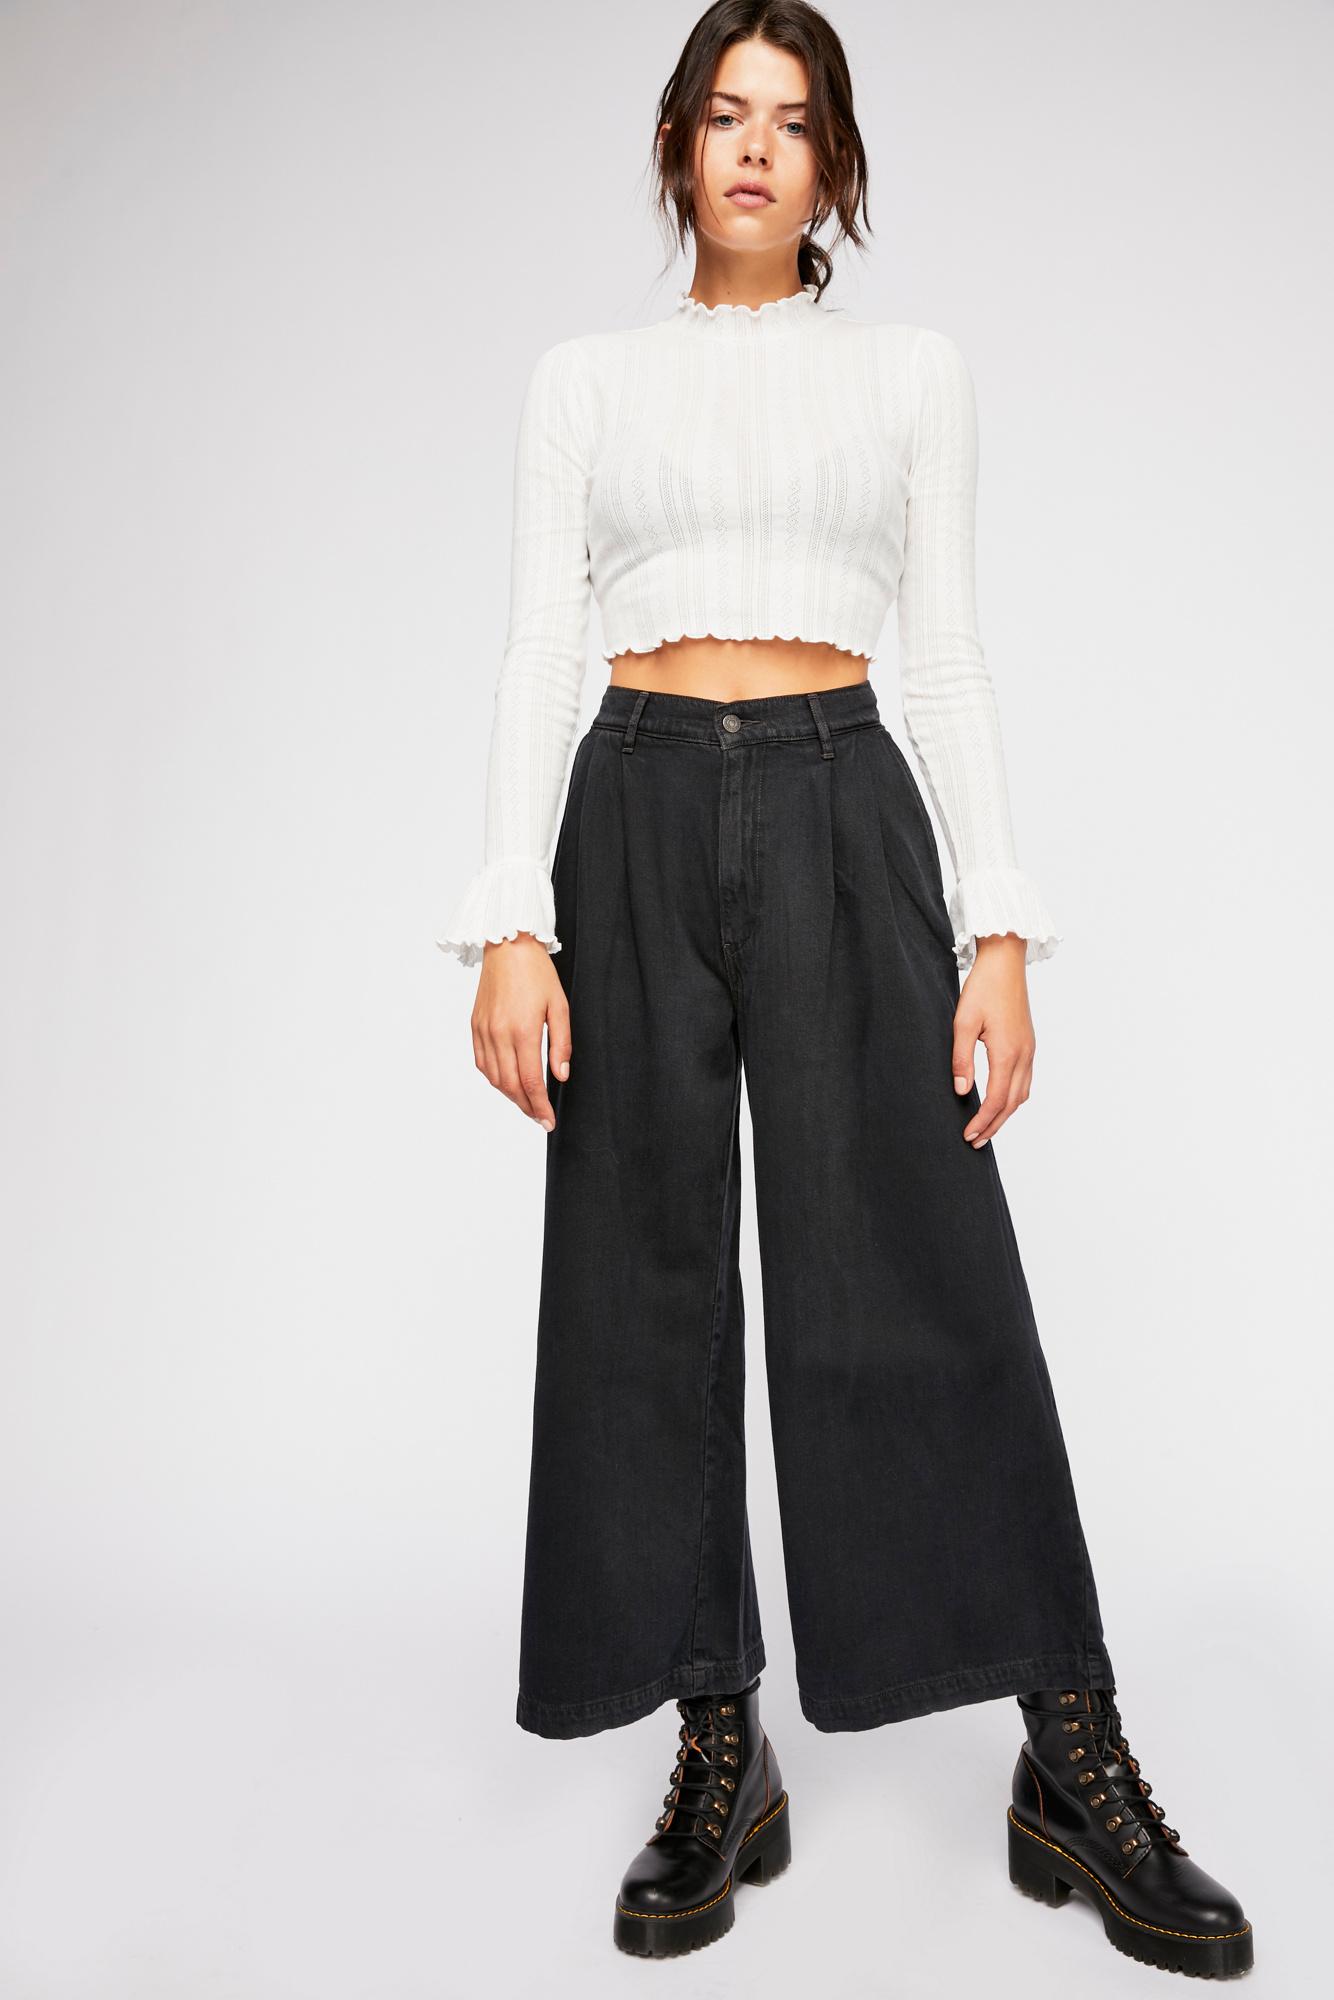 levi's wide leg pleated jeans